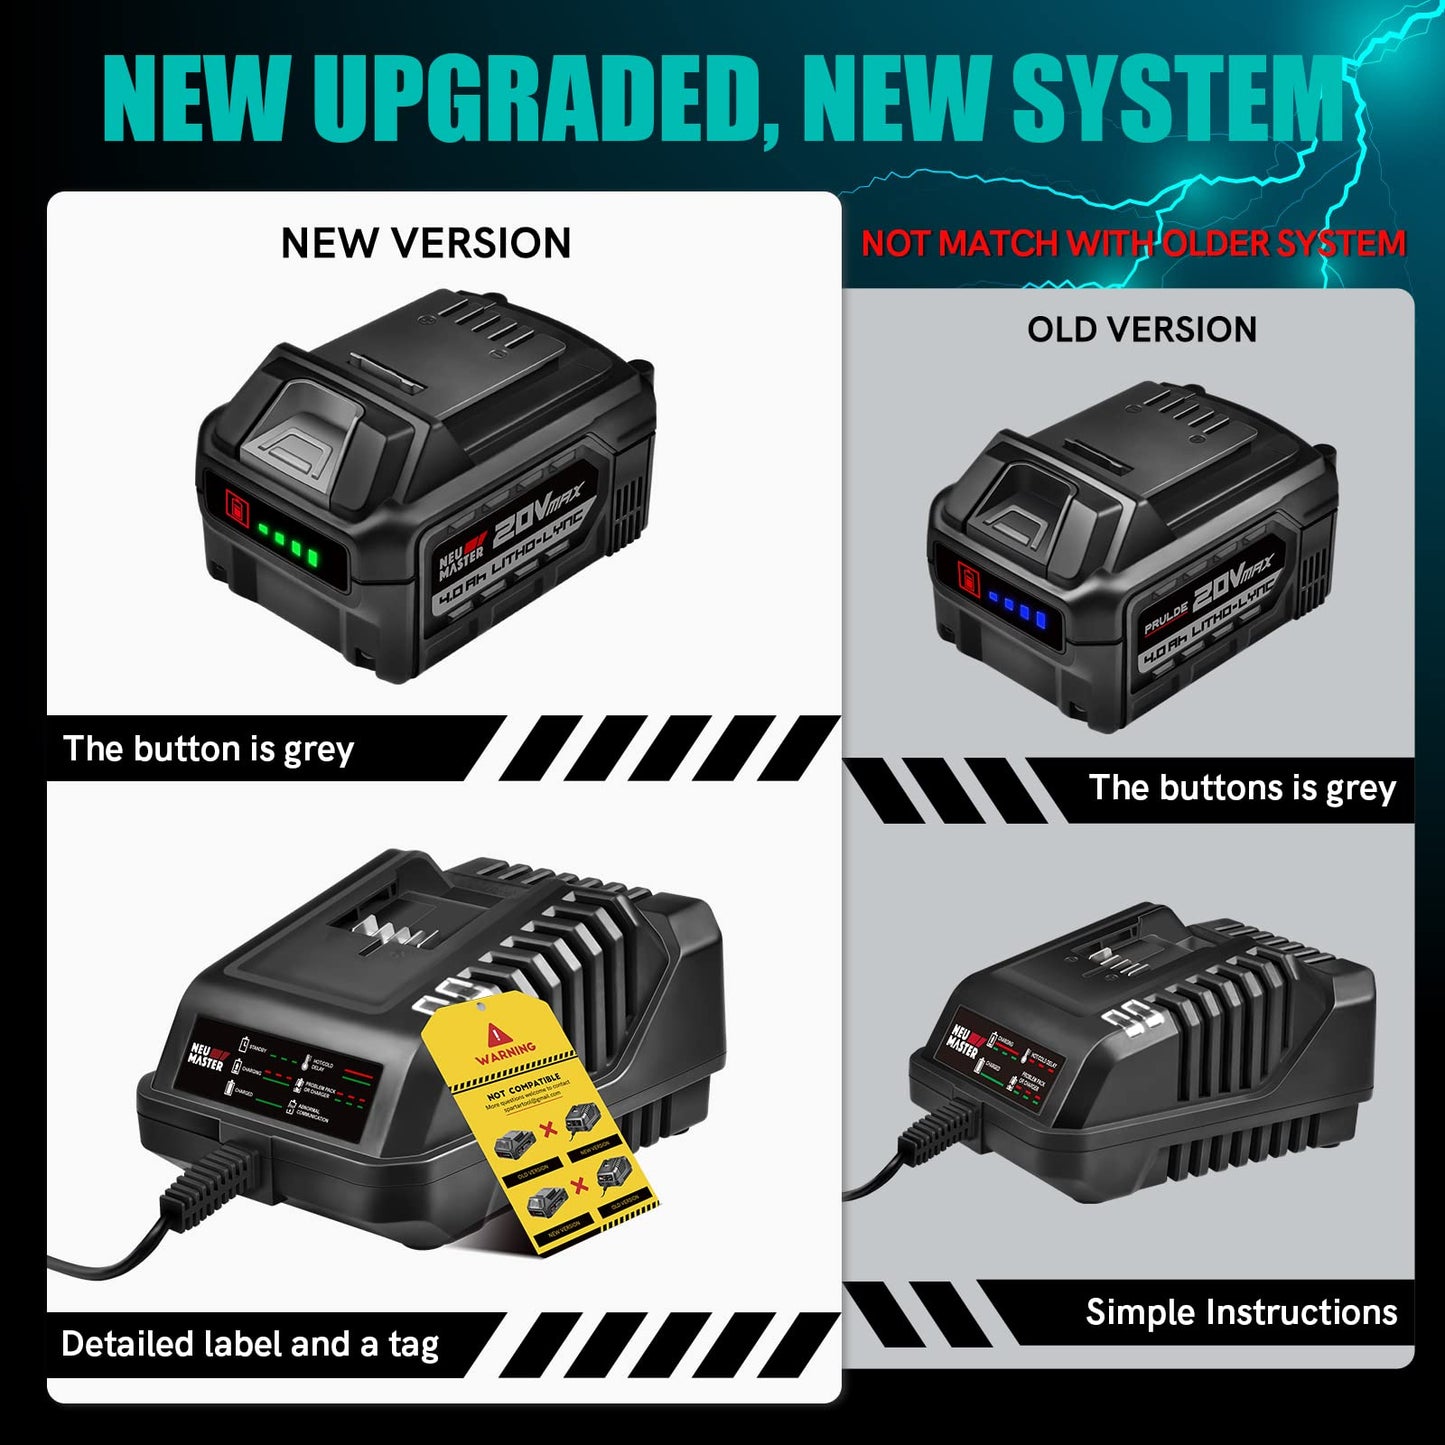 New Upgraded Battery System 4.0AH Battery Pack with 2.4A Charger - Not Compatible for Old Battery System